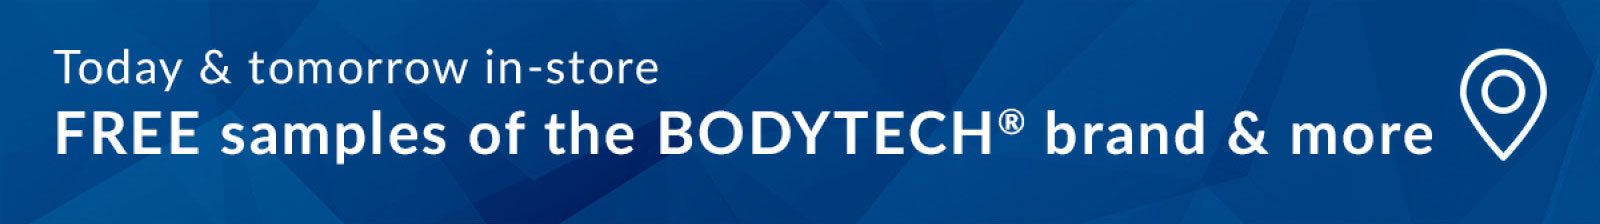 Today & tomorrow in-store | FREE samples of the BODYTECH brand & more